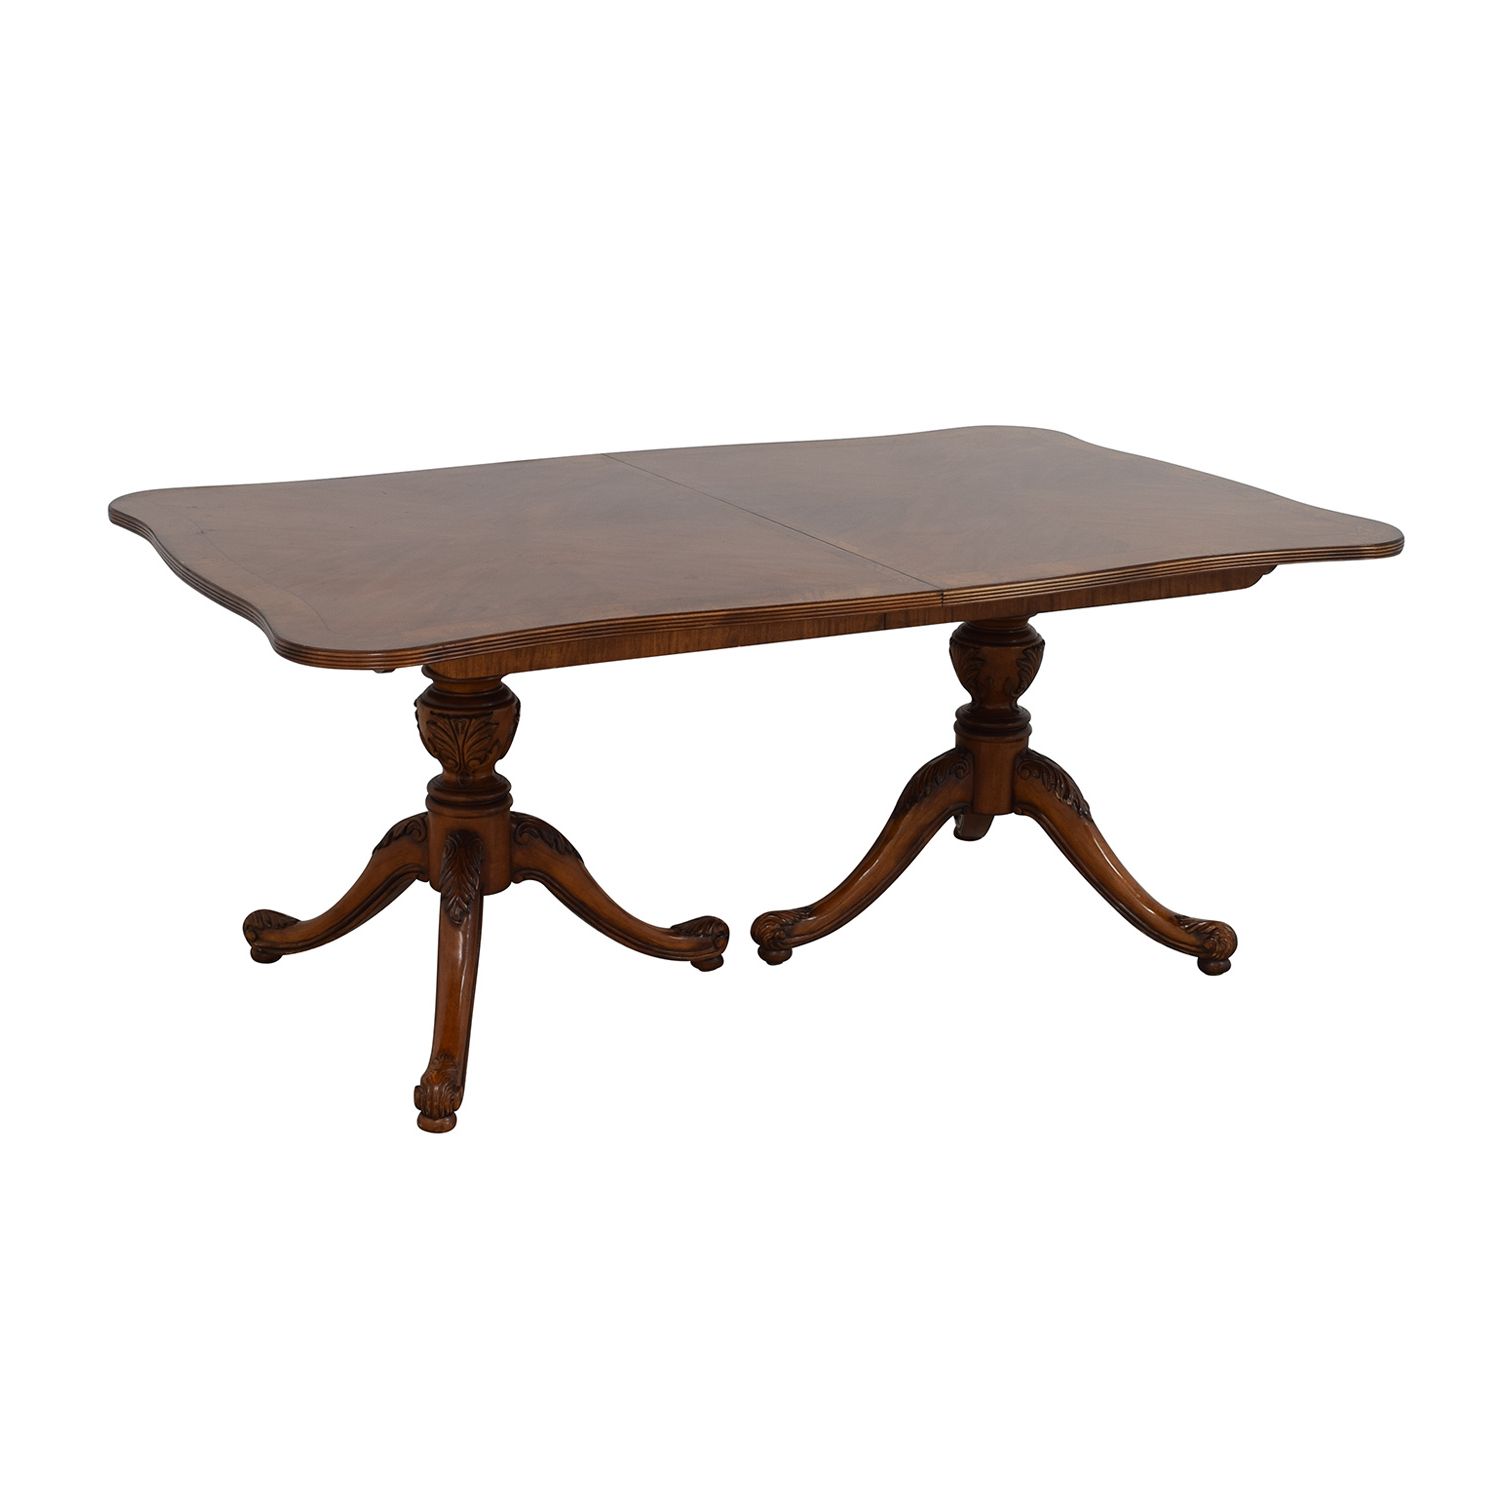 [%76% Off – Drexel Heritage Drexel Heritage Dining Table / Tables In Recent Mahogany Shayne Drop Leaf Kitchen Tables|Mahogany Shayne Drop Leaf Kitchen Tables Within Preferred 76% Off – Drexel Heritage Drexel Heritage Dining Table / Tables|Most Popular Mahogany Shayne Drop Leaf Kitchen Tables Intended For 76% Off – Drexel Heritage Drexel Heritage Dining Table / Tables|Famous 76% Off – Drexel Heritage Drexel Heritage Dining Table / Tables Pertaining To Mahogany Shayne Drop Leaf Kitchen Tables%] (View 18 of 25)